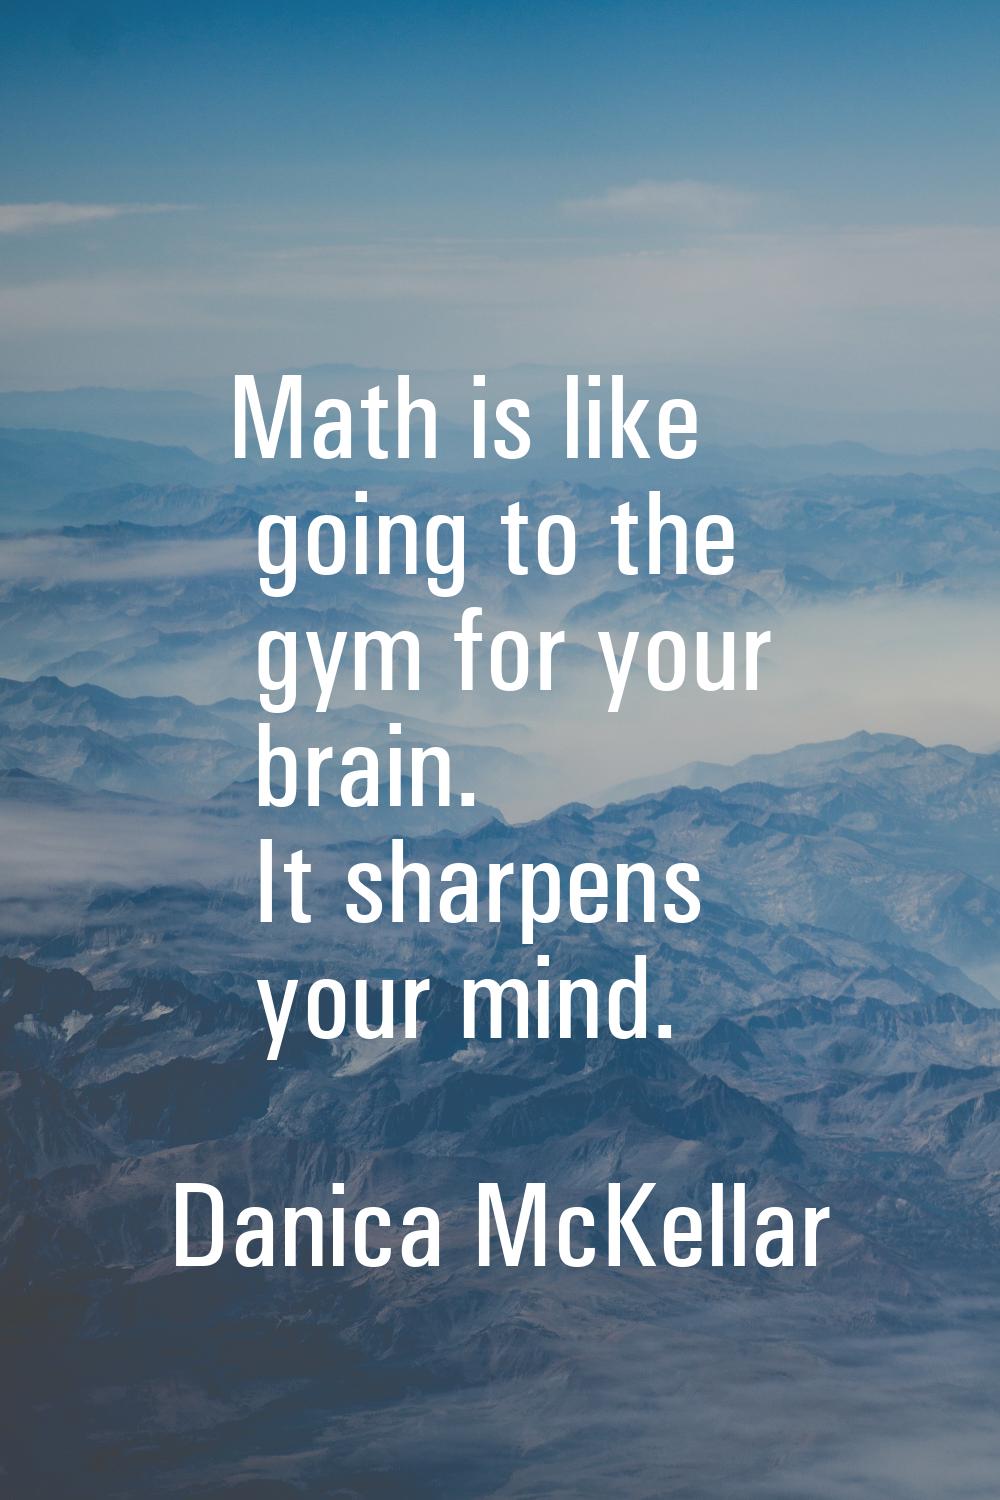 Math is like going to the gym for your brain. It sharpens your mind.